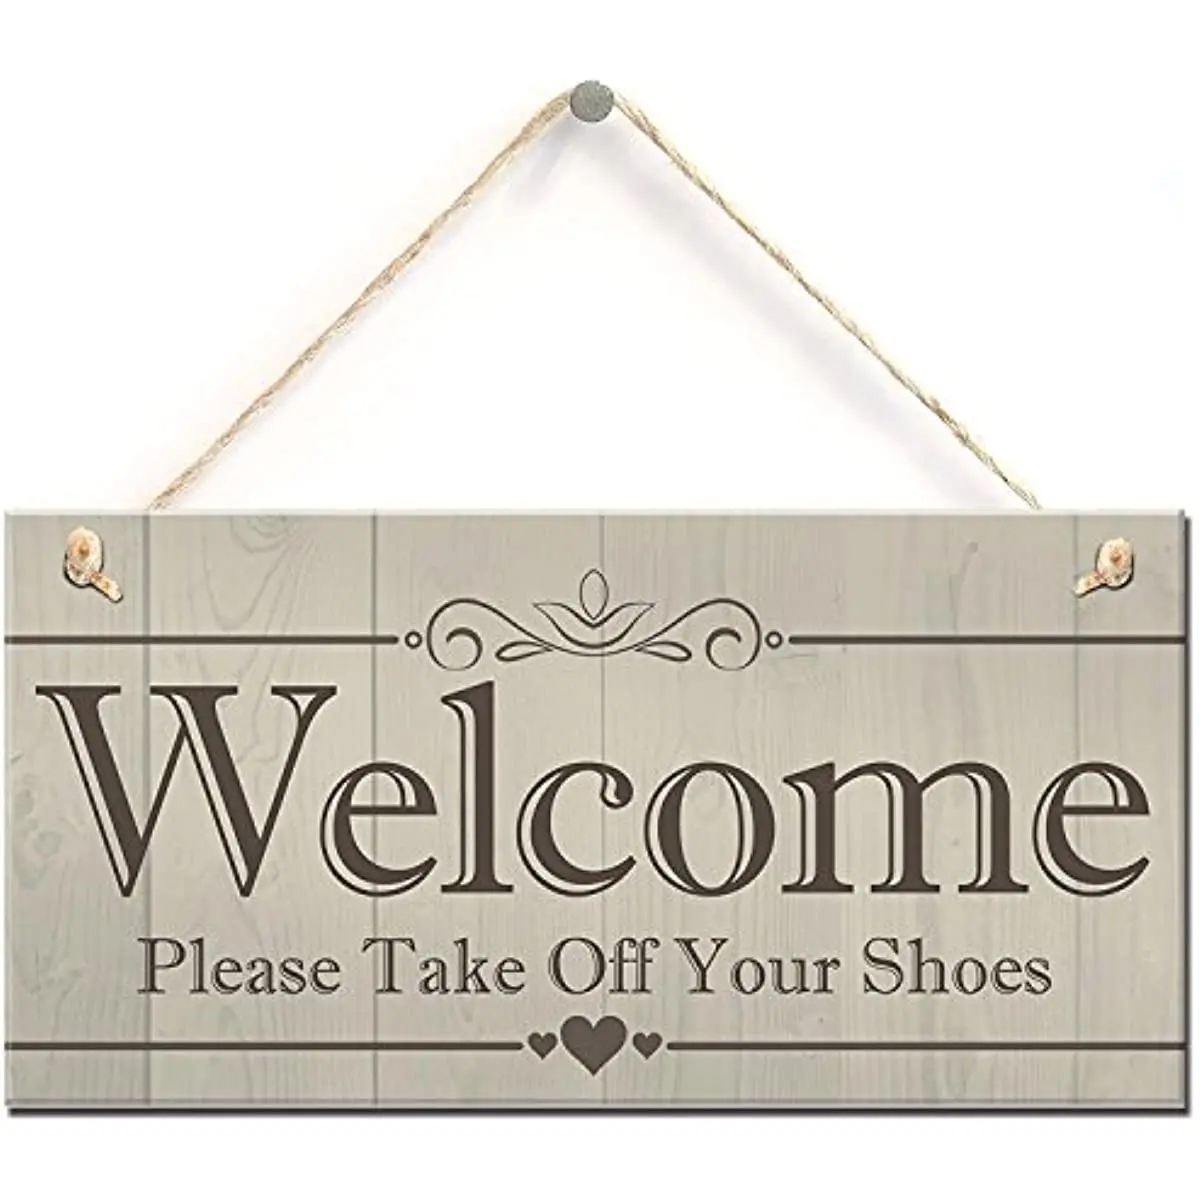 

Welcome Please Take Off Your Shoes Hanging Plaque Sign House Porch Decoration Gift 30cm X 15cm Wall Decor Home Decor